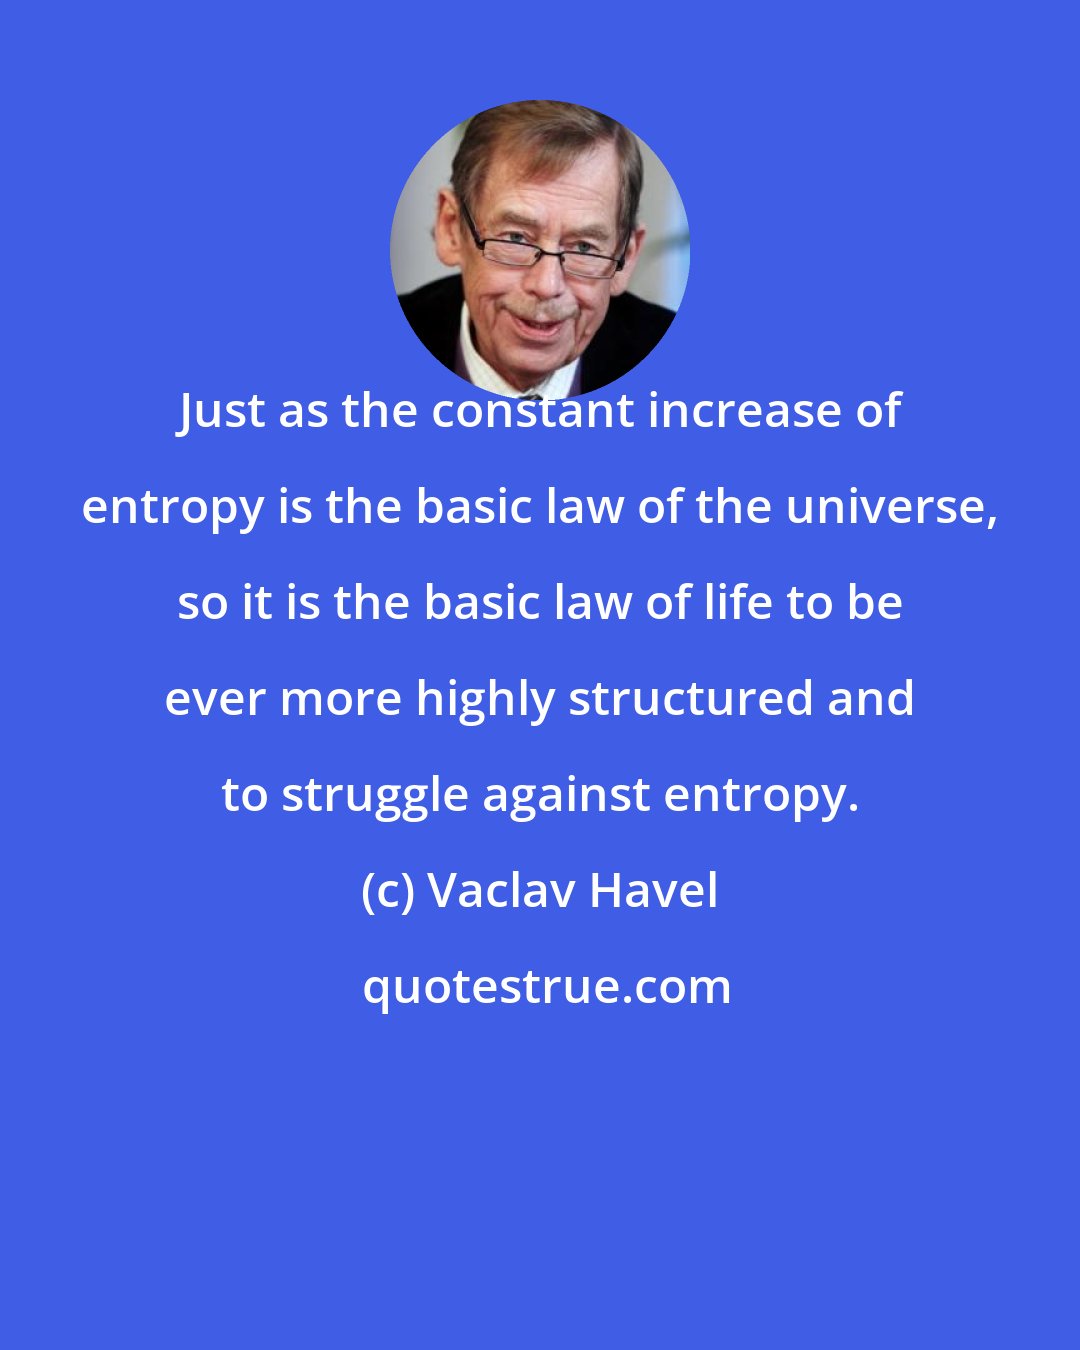 Vaclav Havel: Just as the constant increase of entropy is the basic law of the universe, so it is the basic law of life to be ever more highly structured and to struggle against entropy.